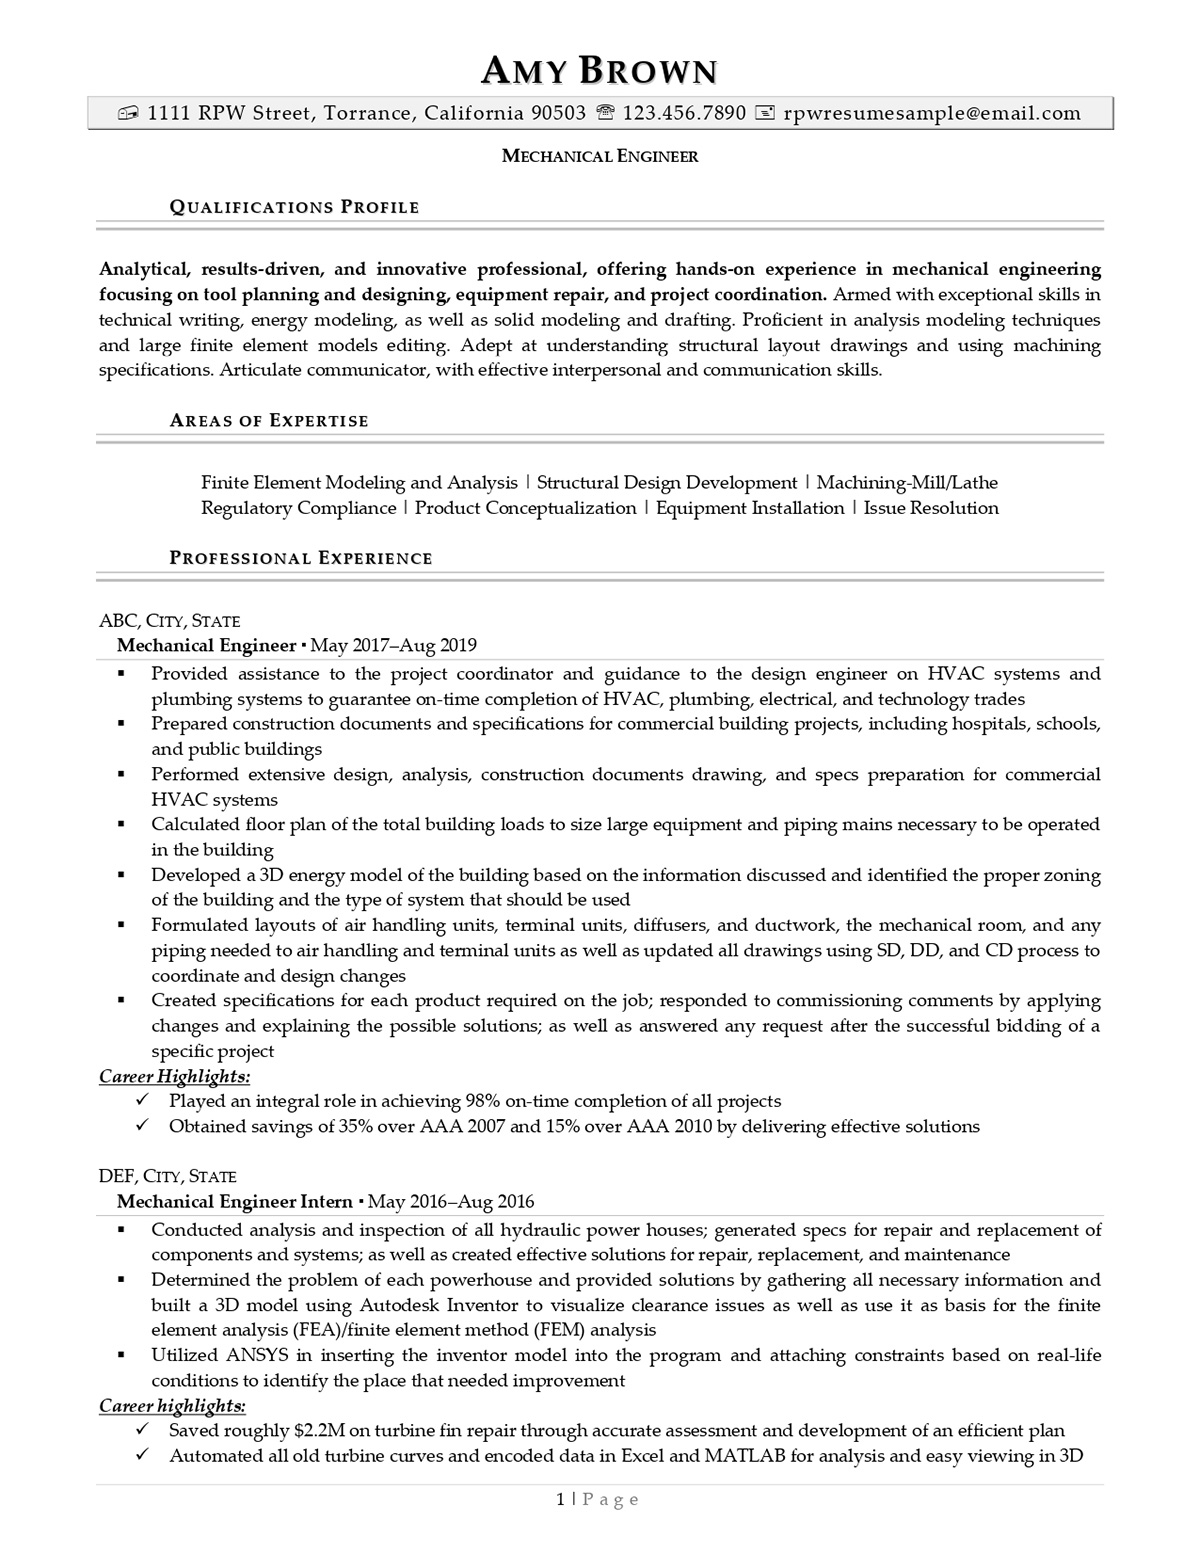 Resume Professional Writers Mechanical Engineer Resume Example Page One